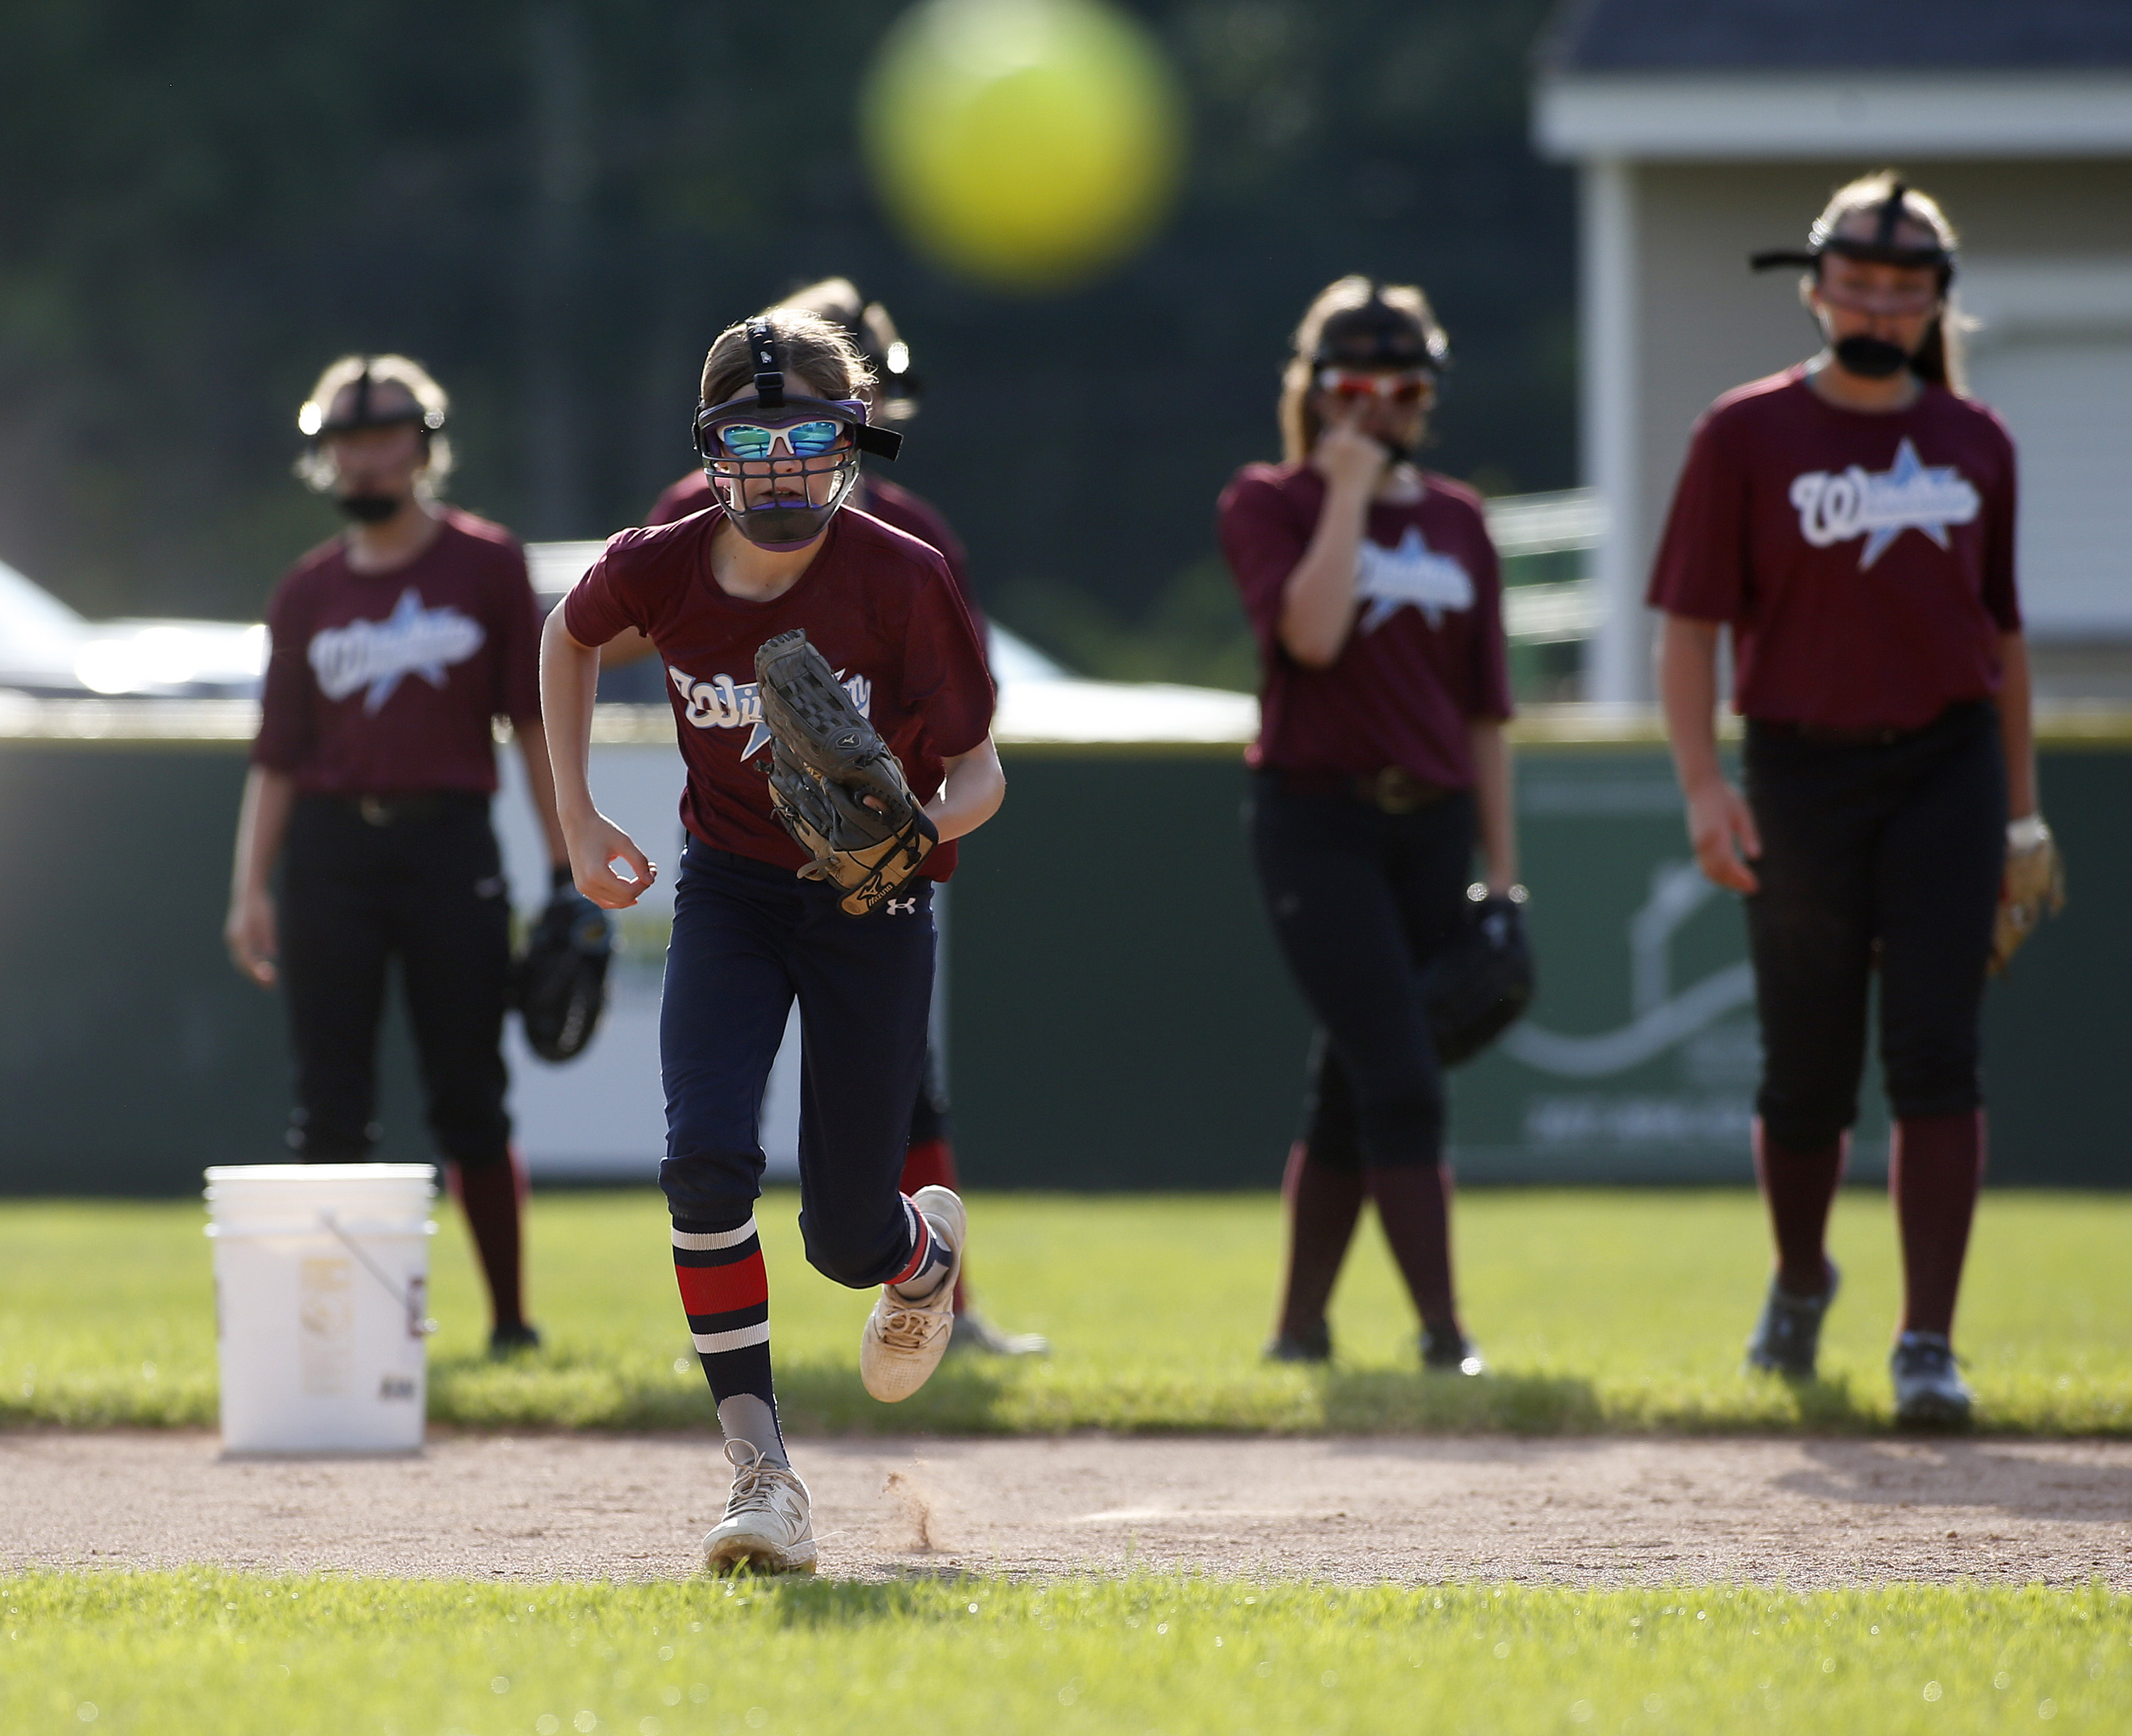 How to Watch 2023 Little League Softball World Series today - August 10